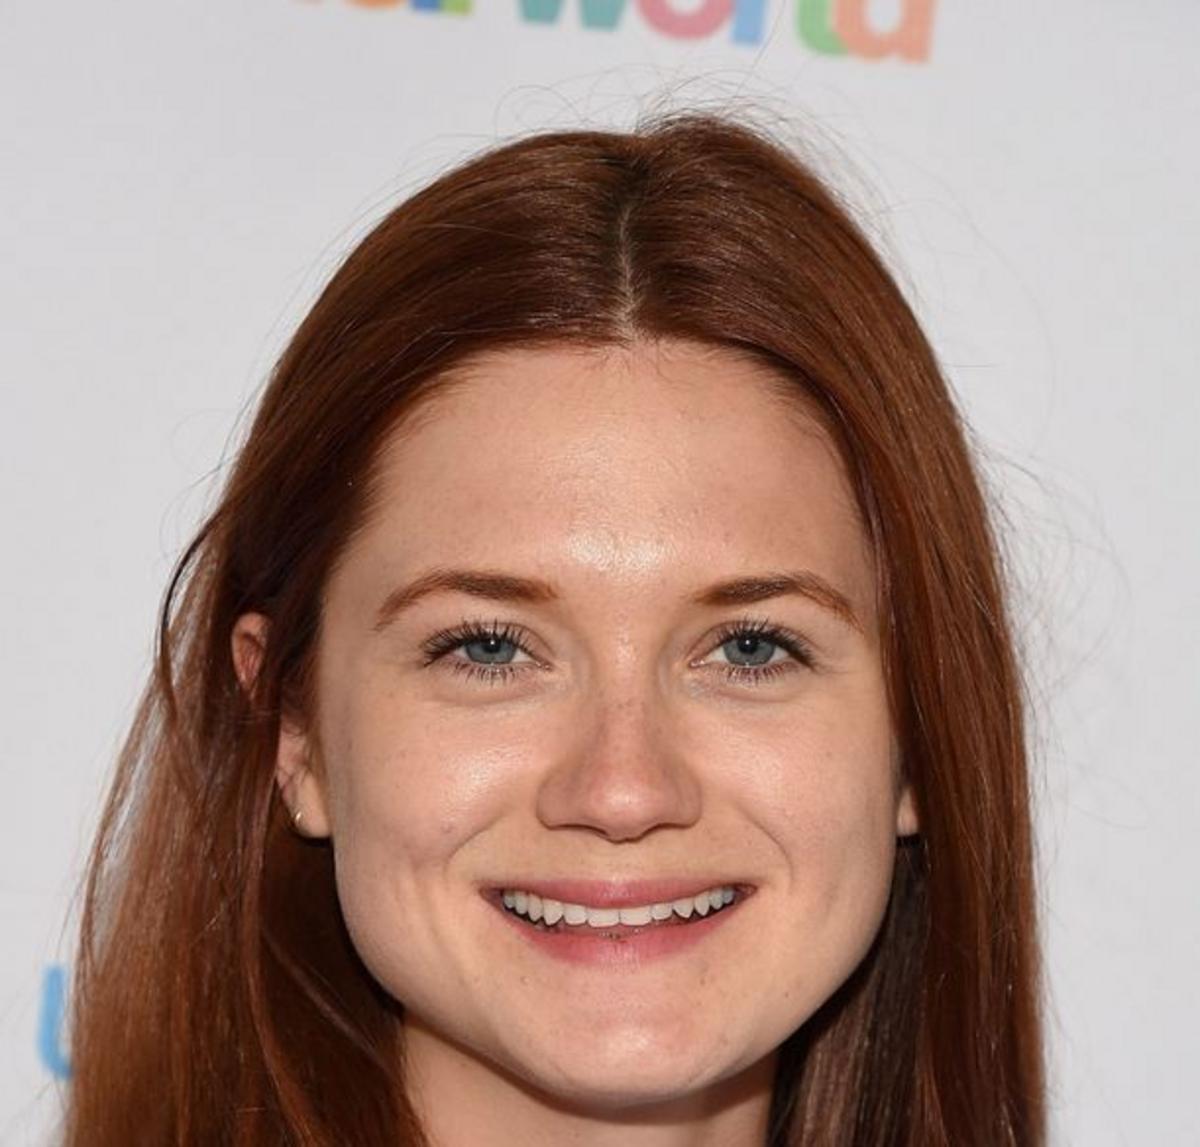 Pictures bonnie wright Bonnie Wright